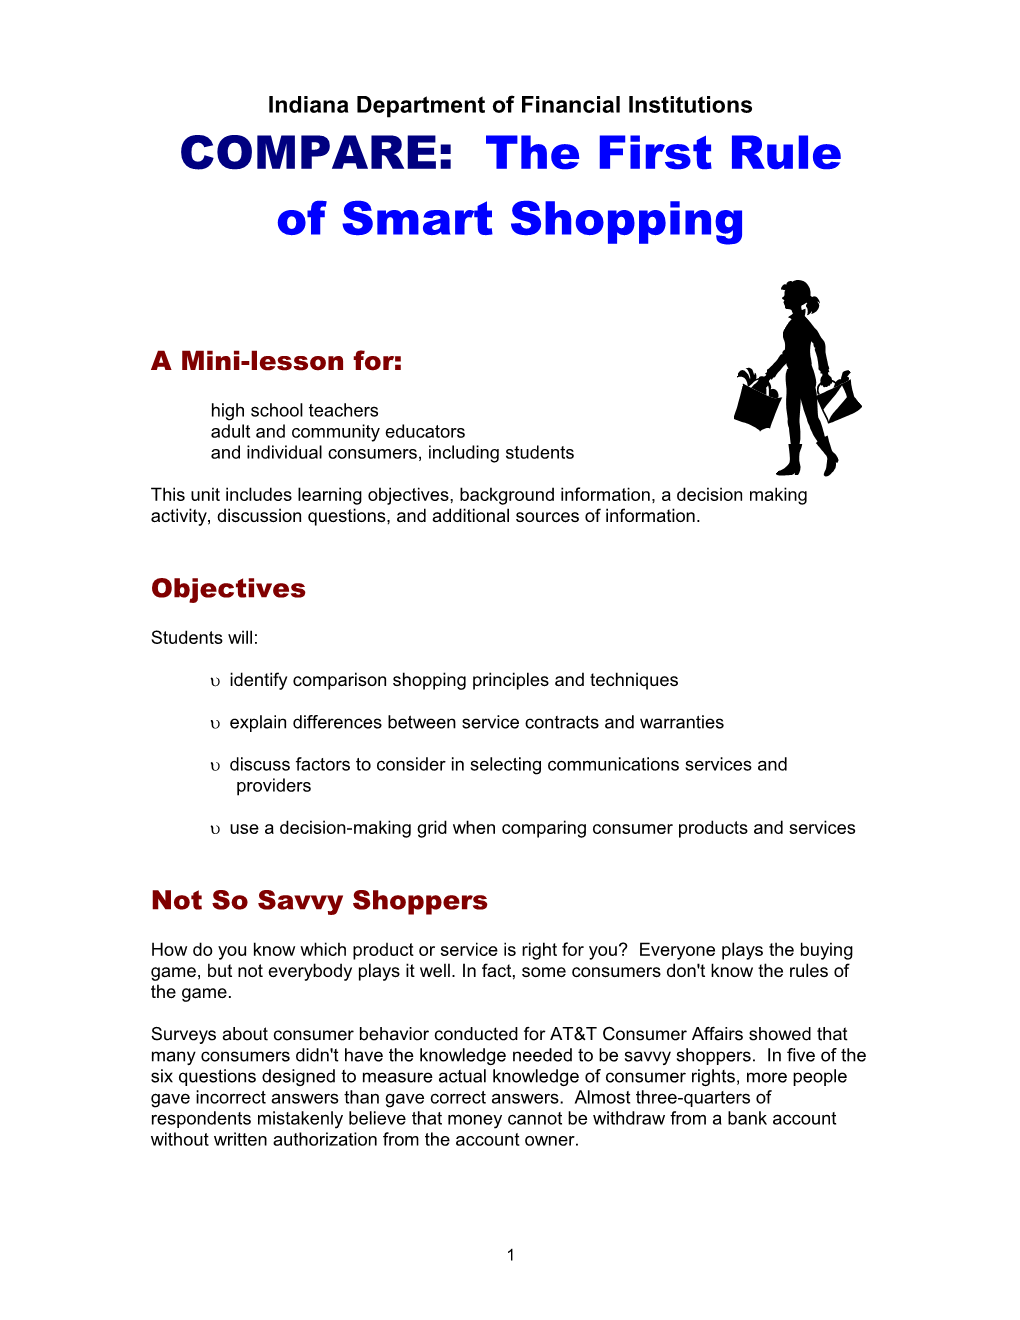 COMPARE: the First Rule of Smart Shopping